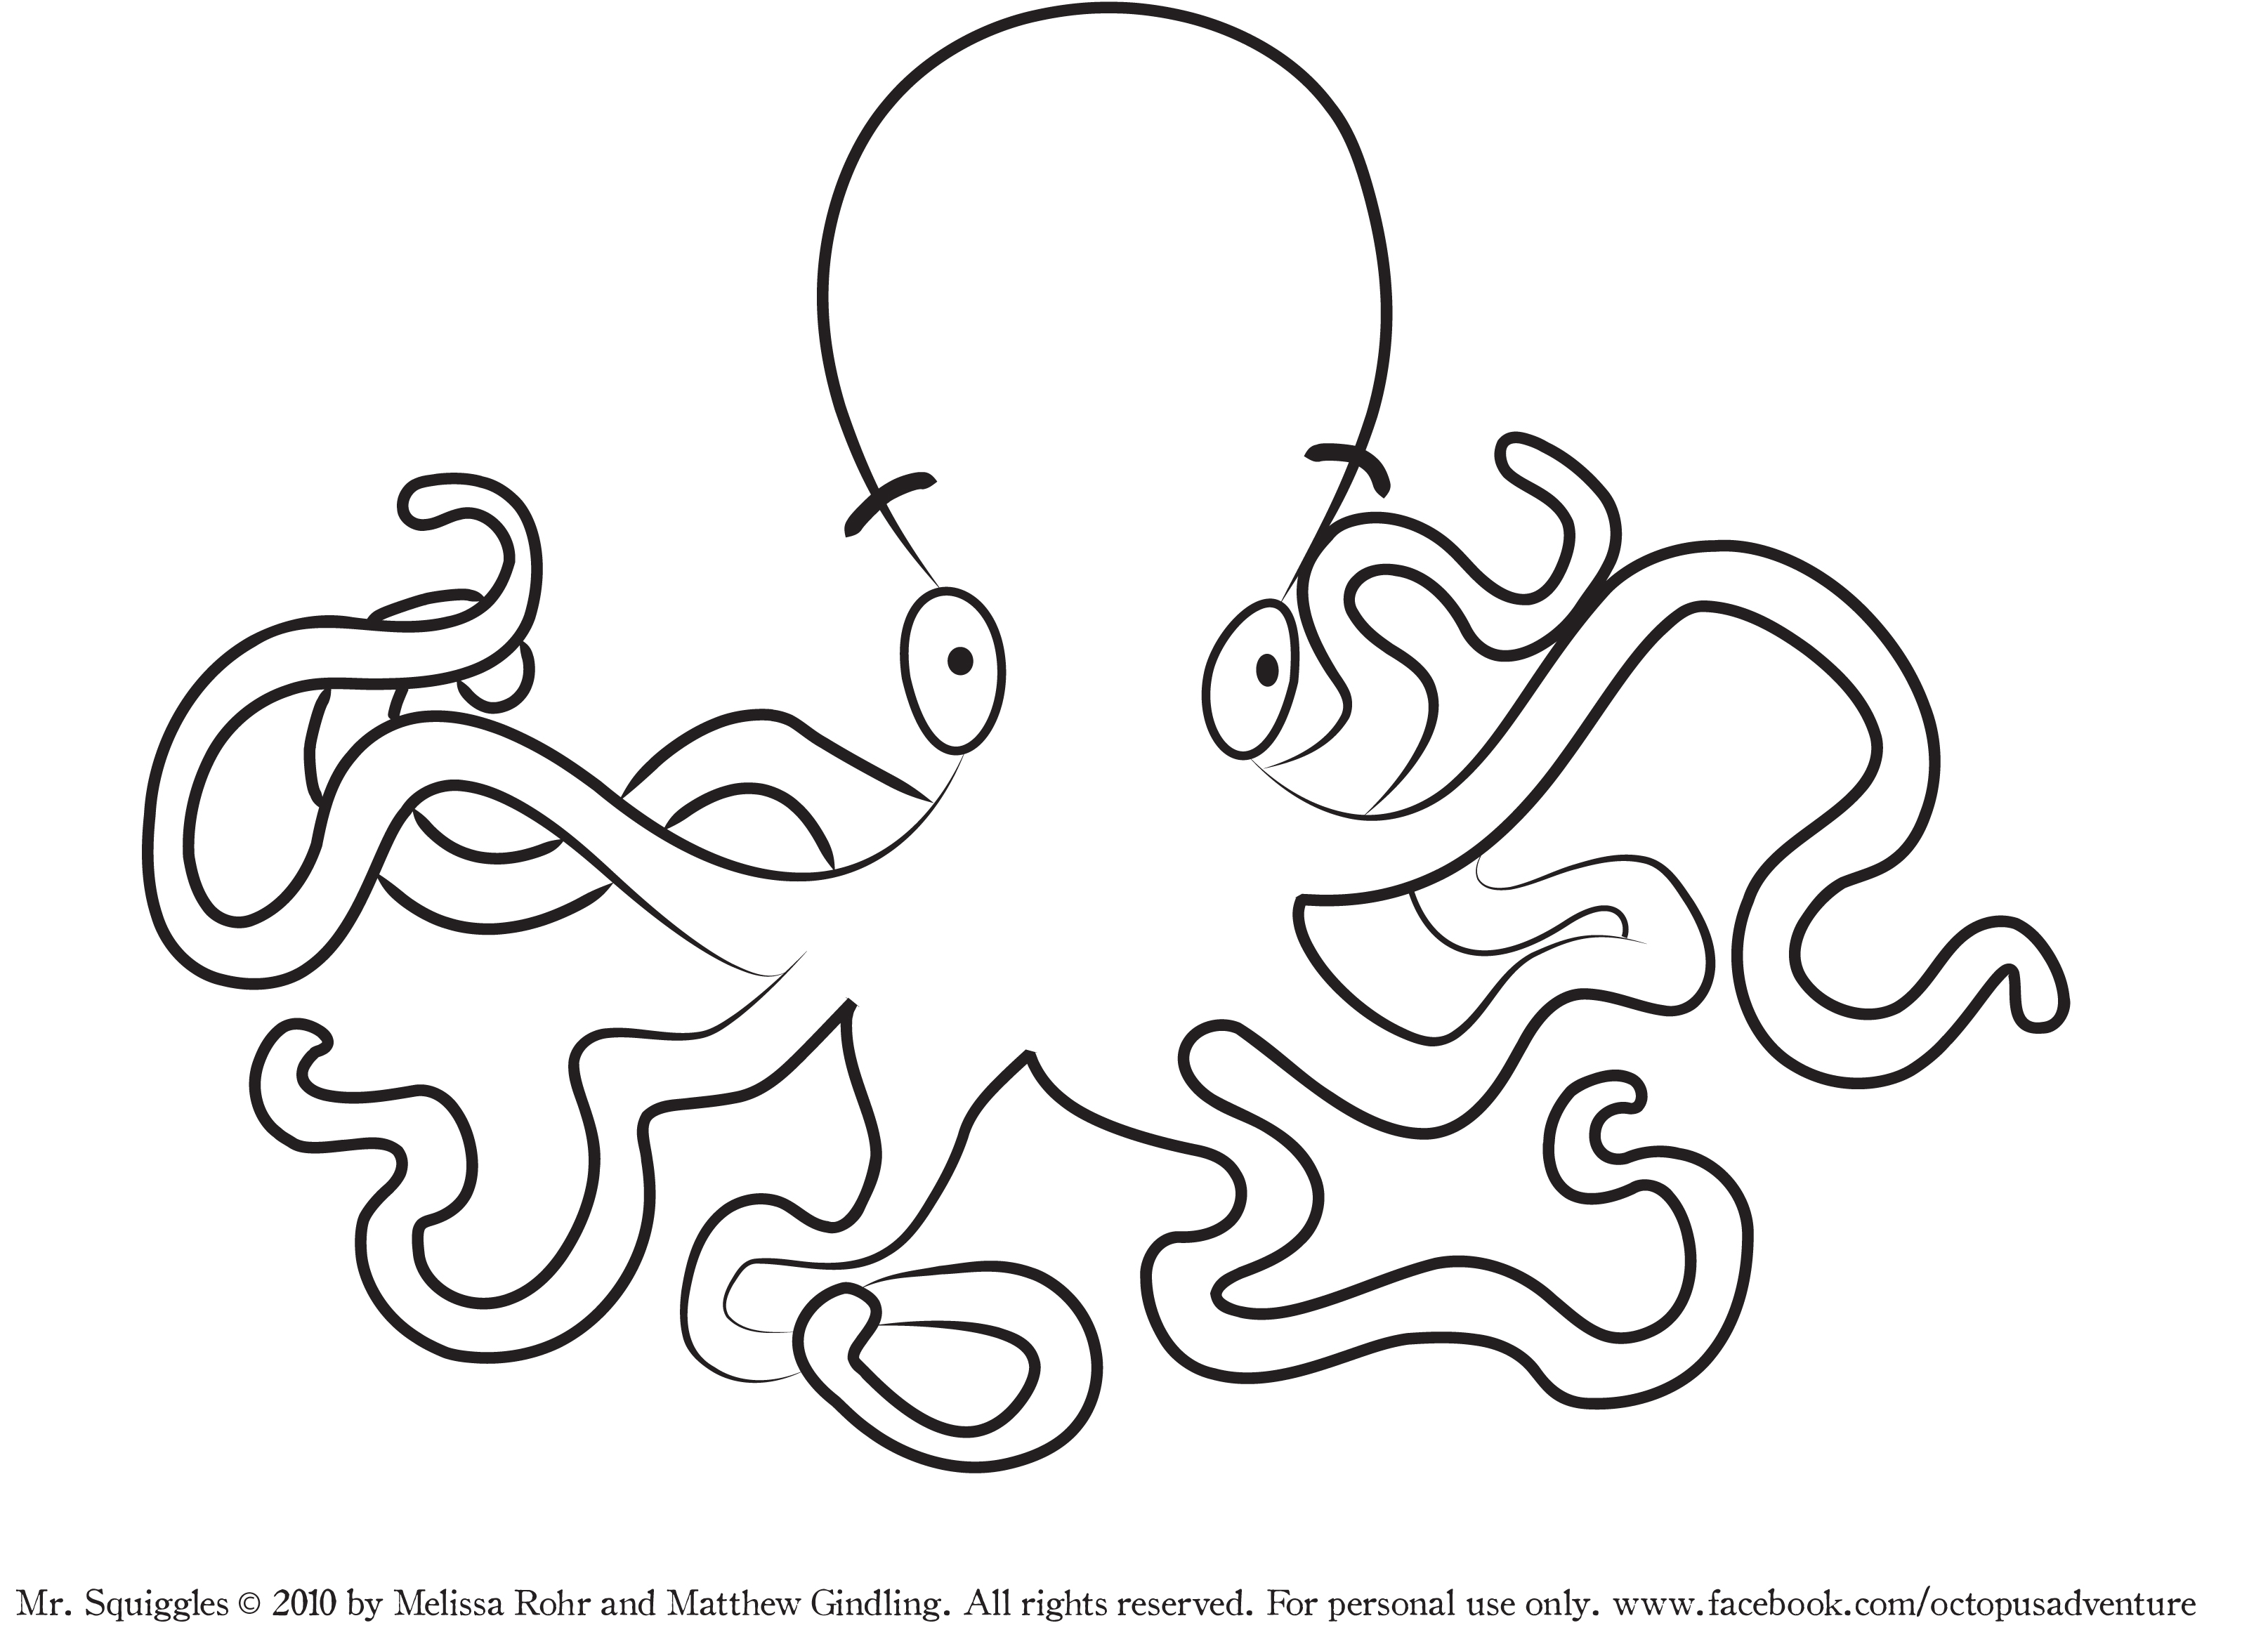 Octopus coloring pages to download and print for free